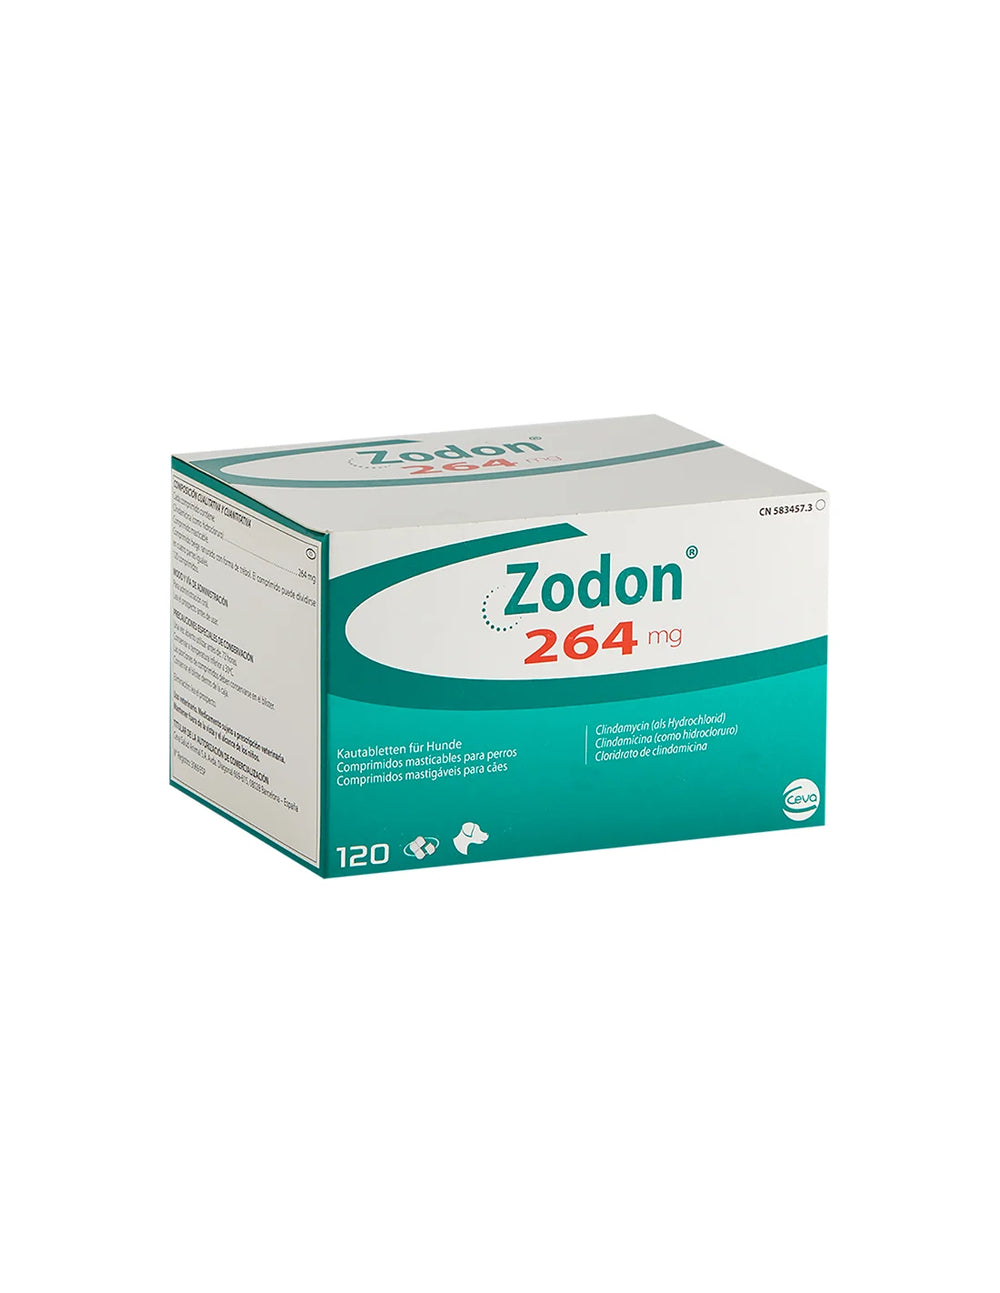 Zodon 264 mg – Film of 6 chewable tablets